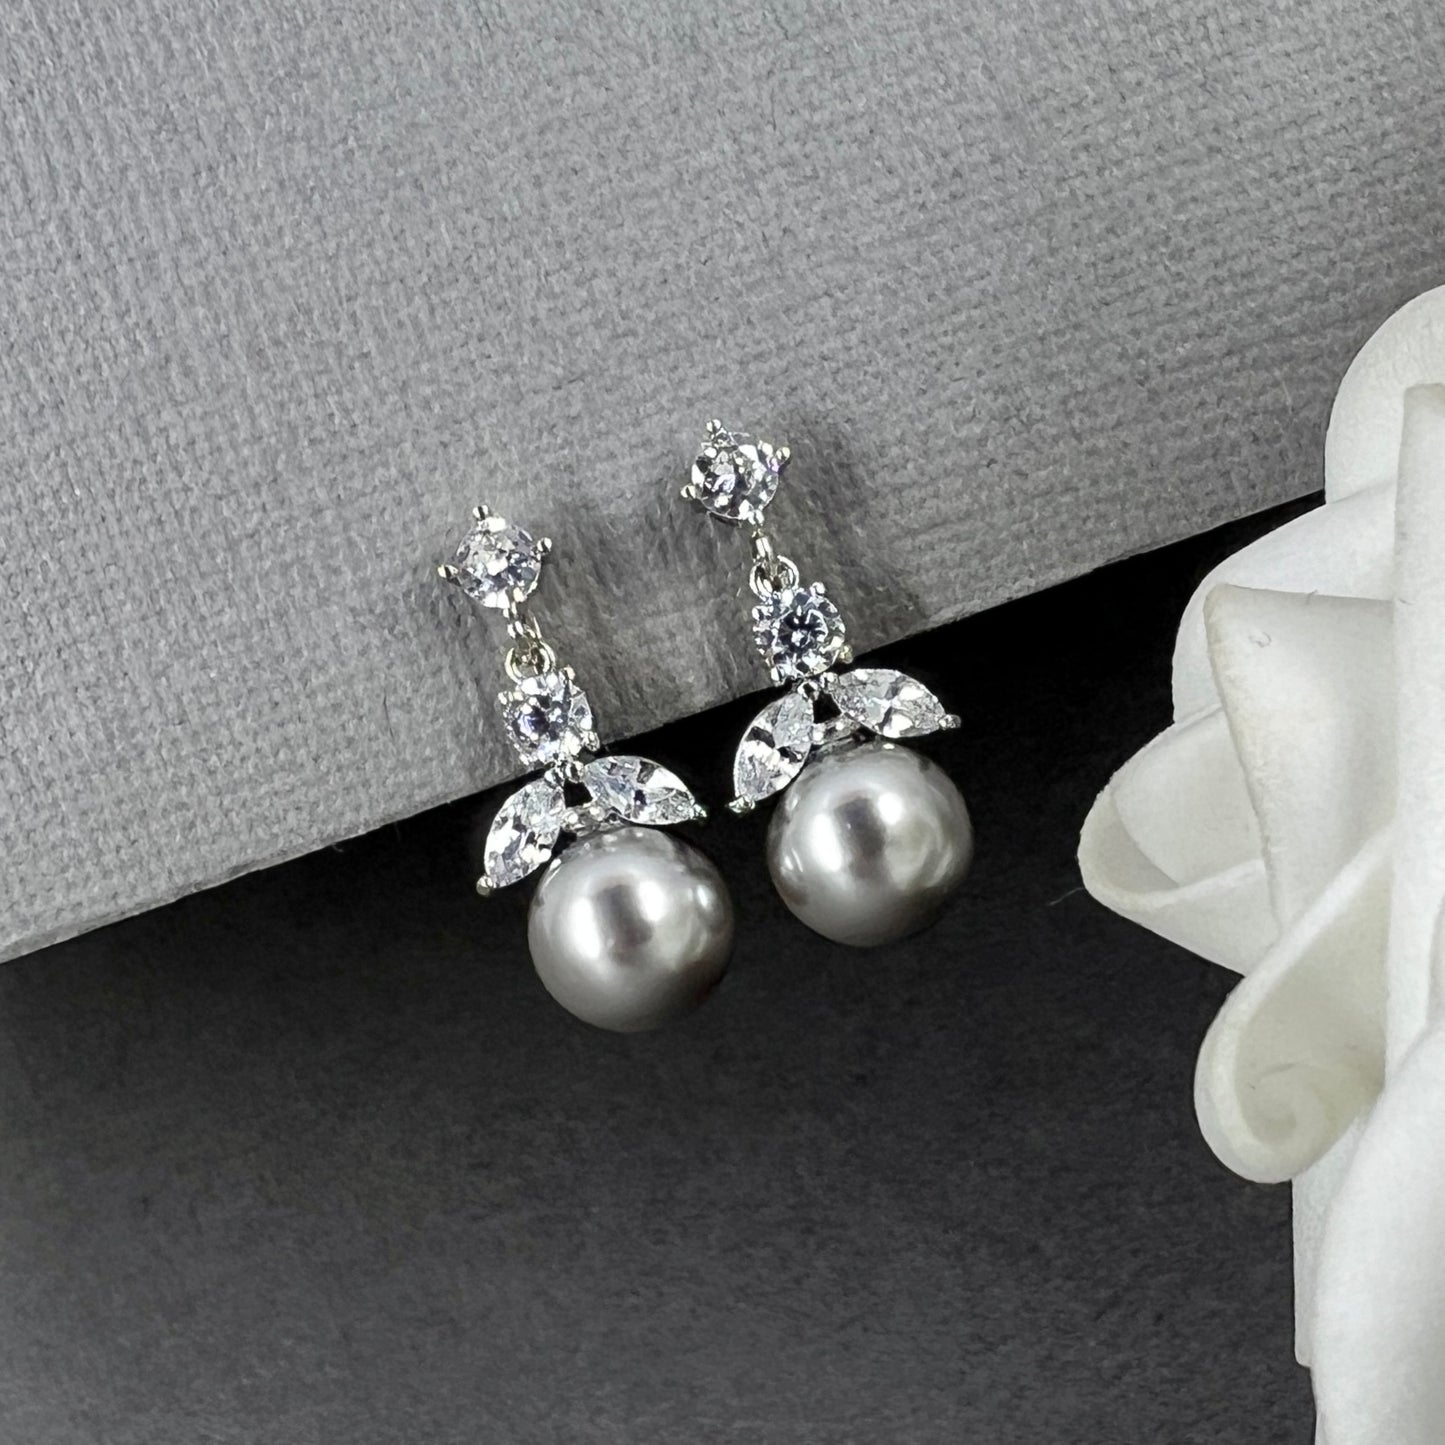 Miley CZ Floral and Grey Pearl Clip-on Earrings